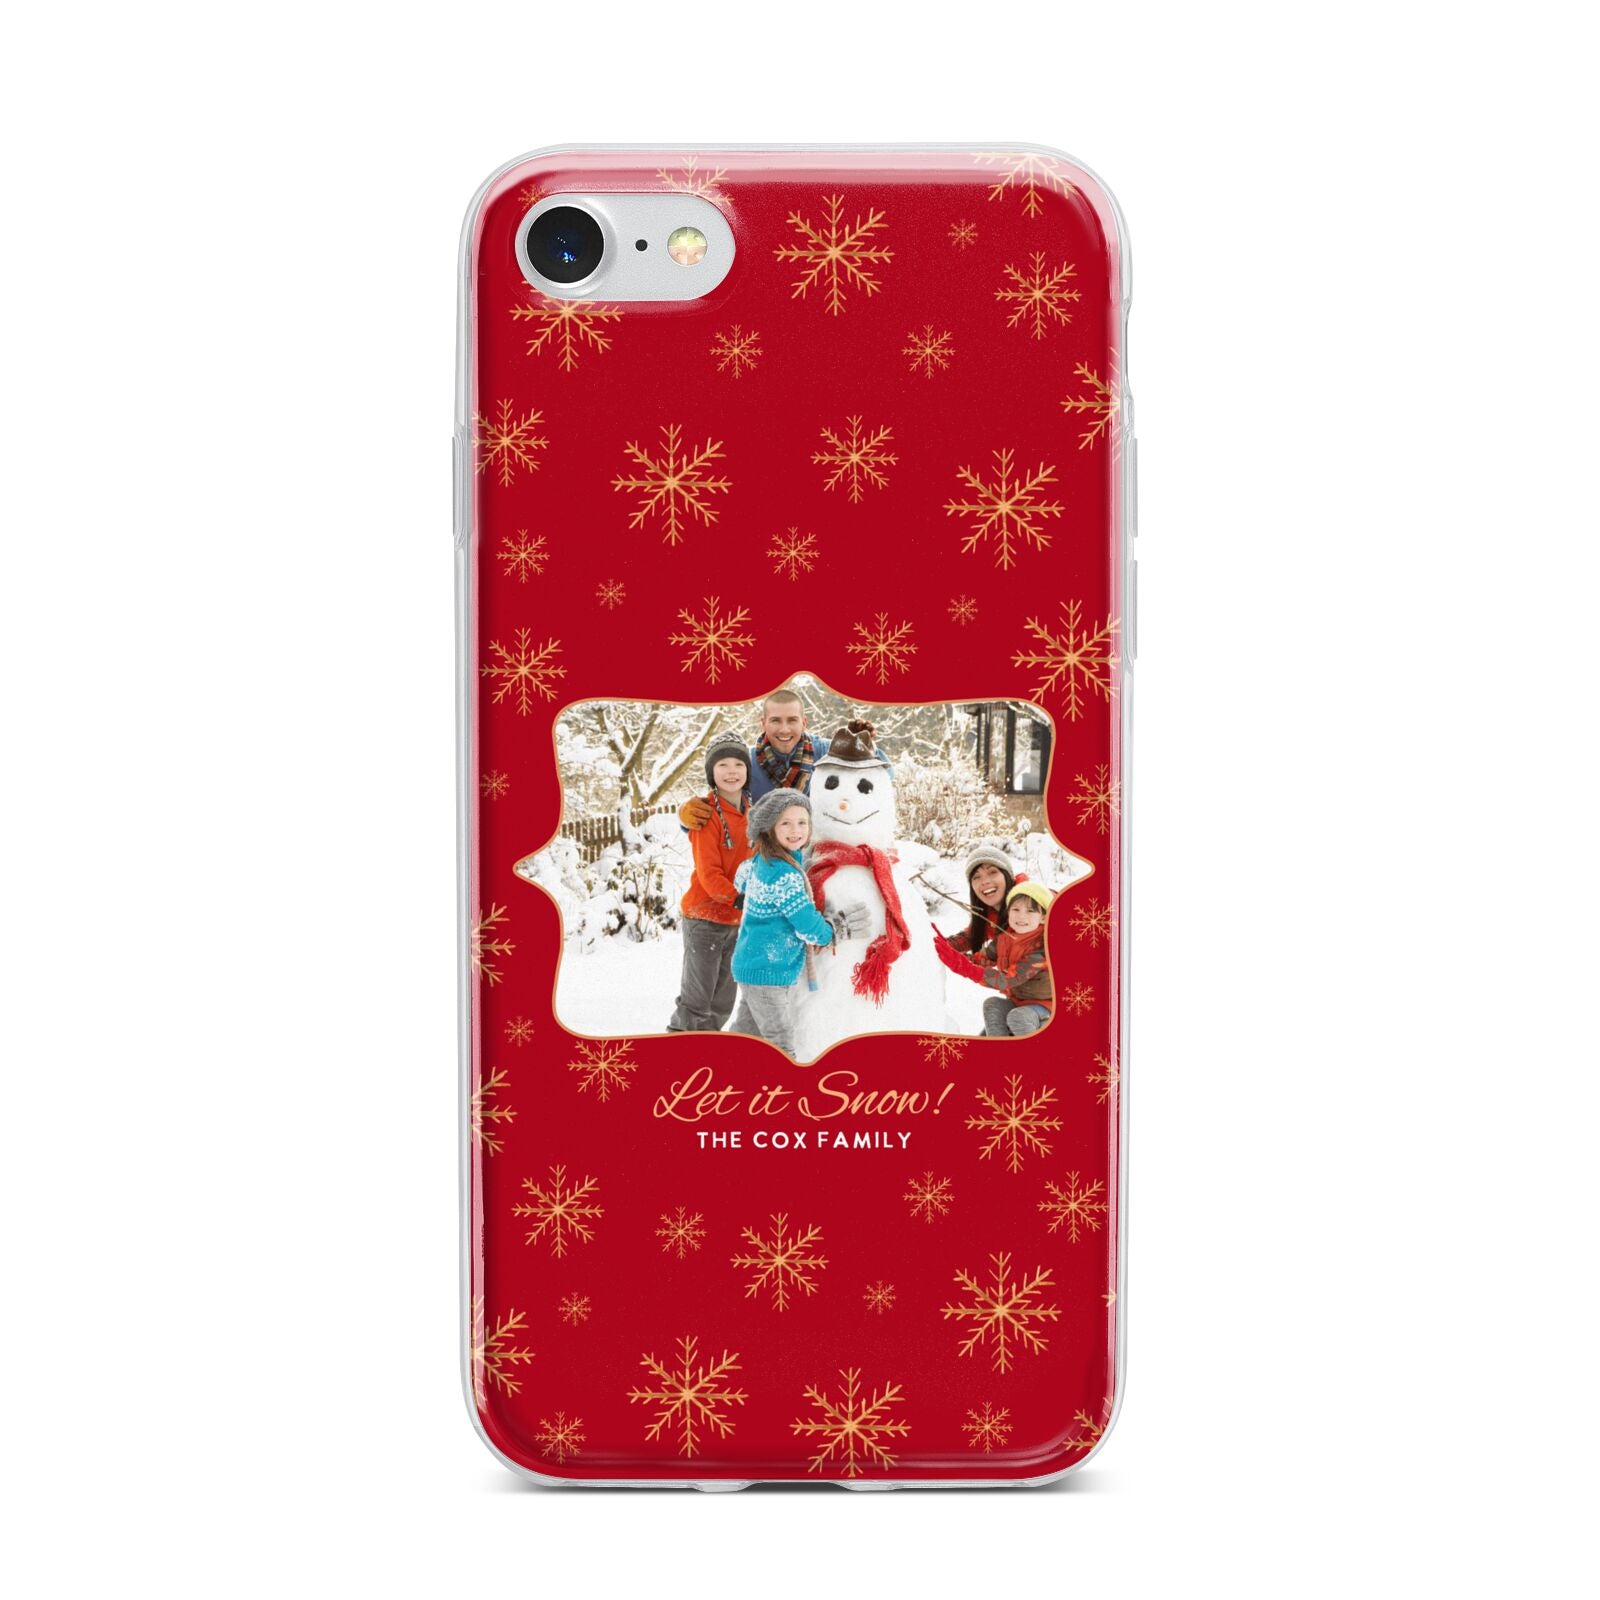 Let it Snow Christmas Photo Upload iPhone 7 Bumper Case on Silver iPhone